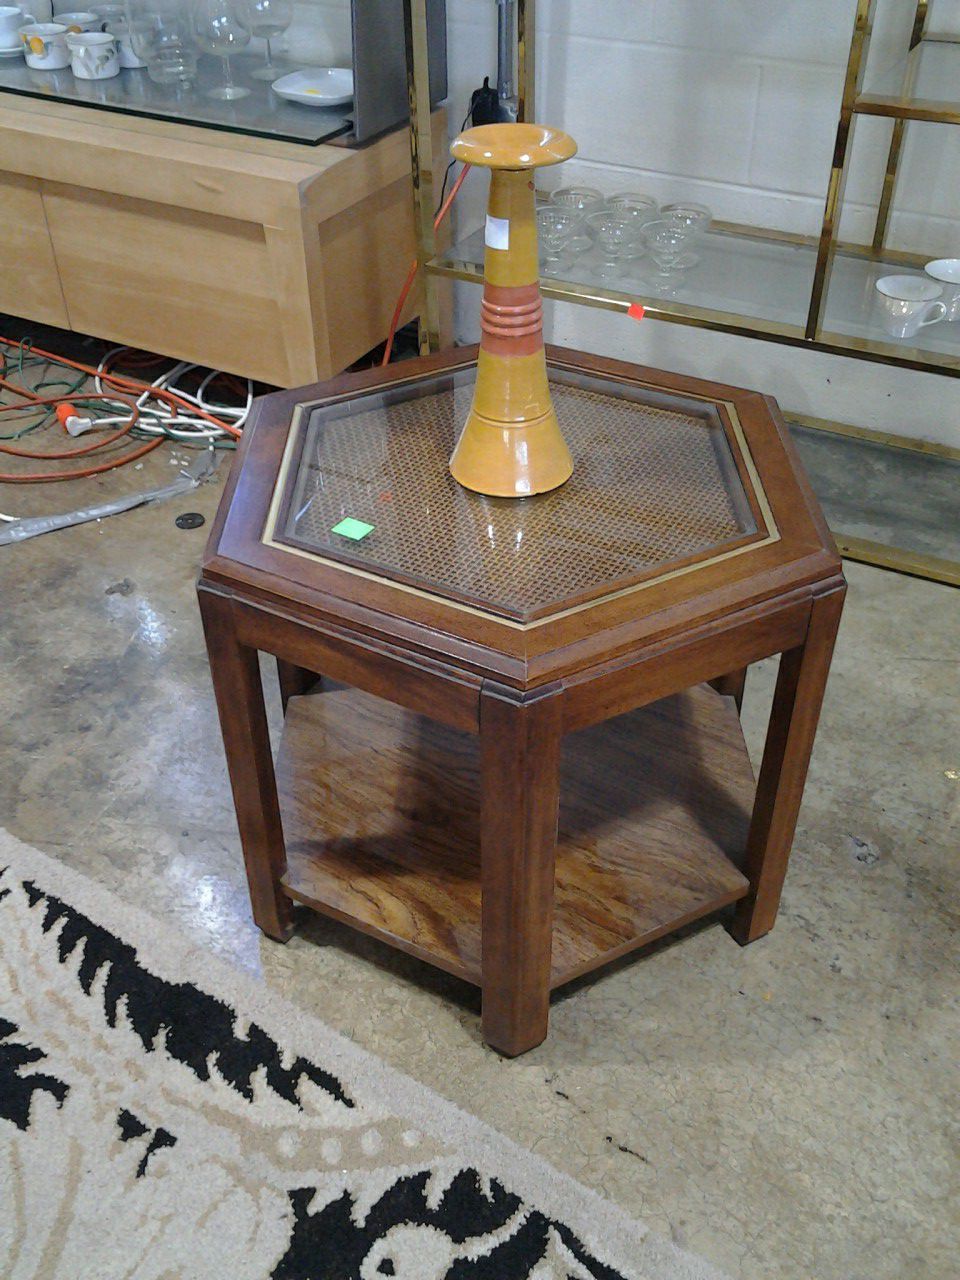 Patternes Coffee Table